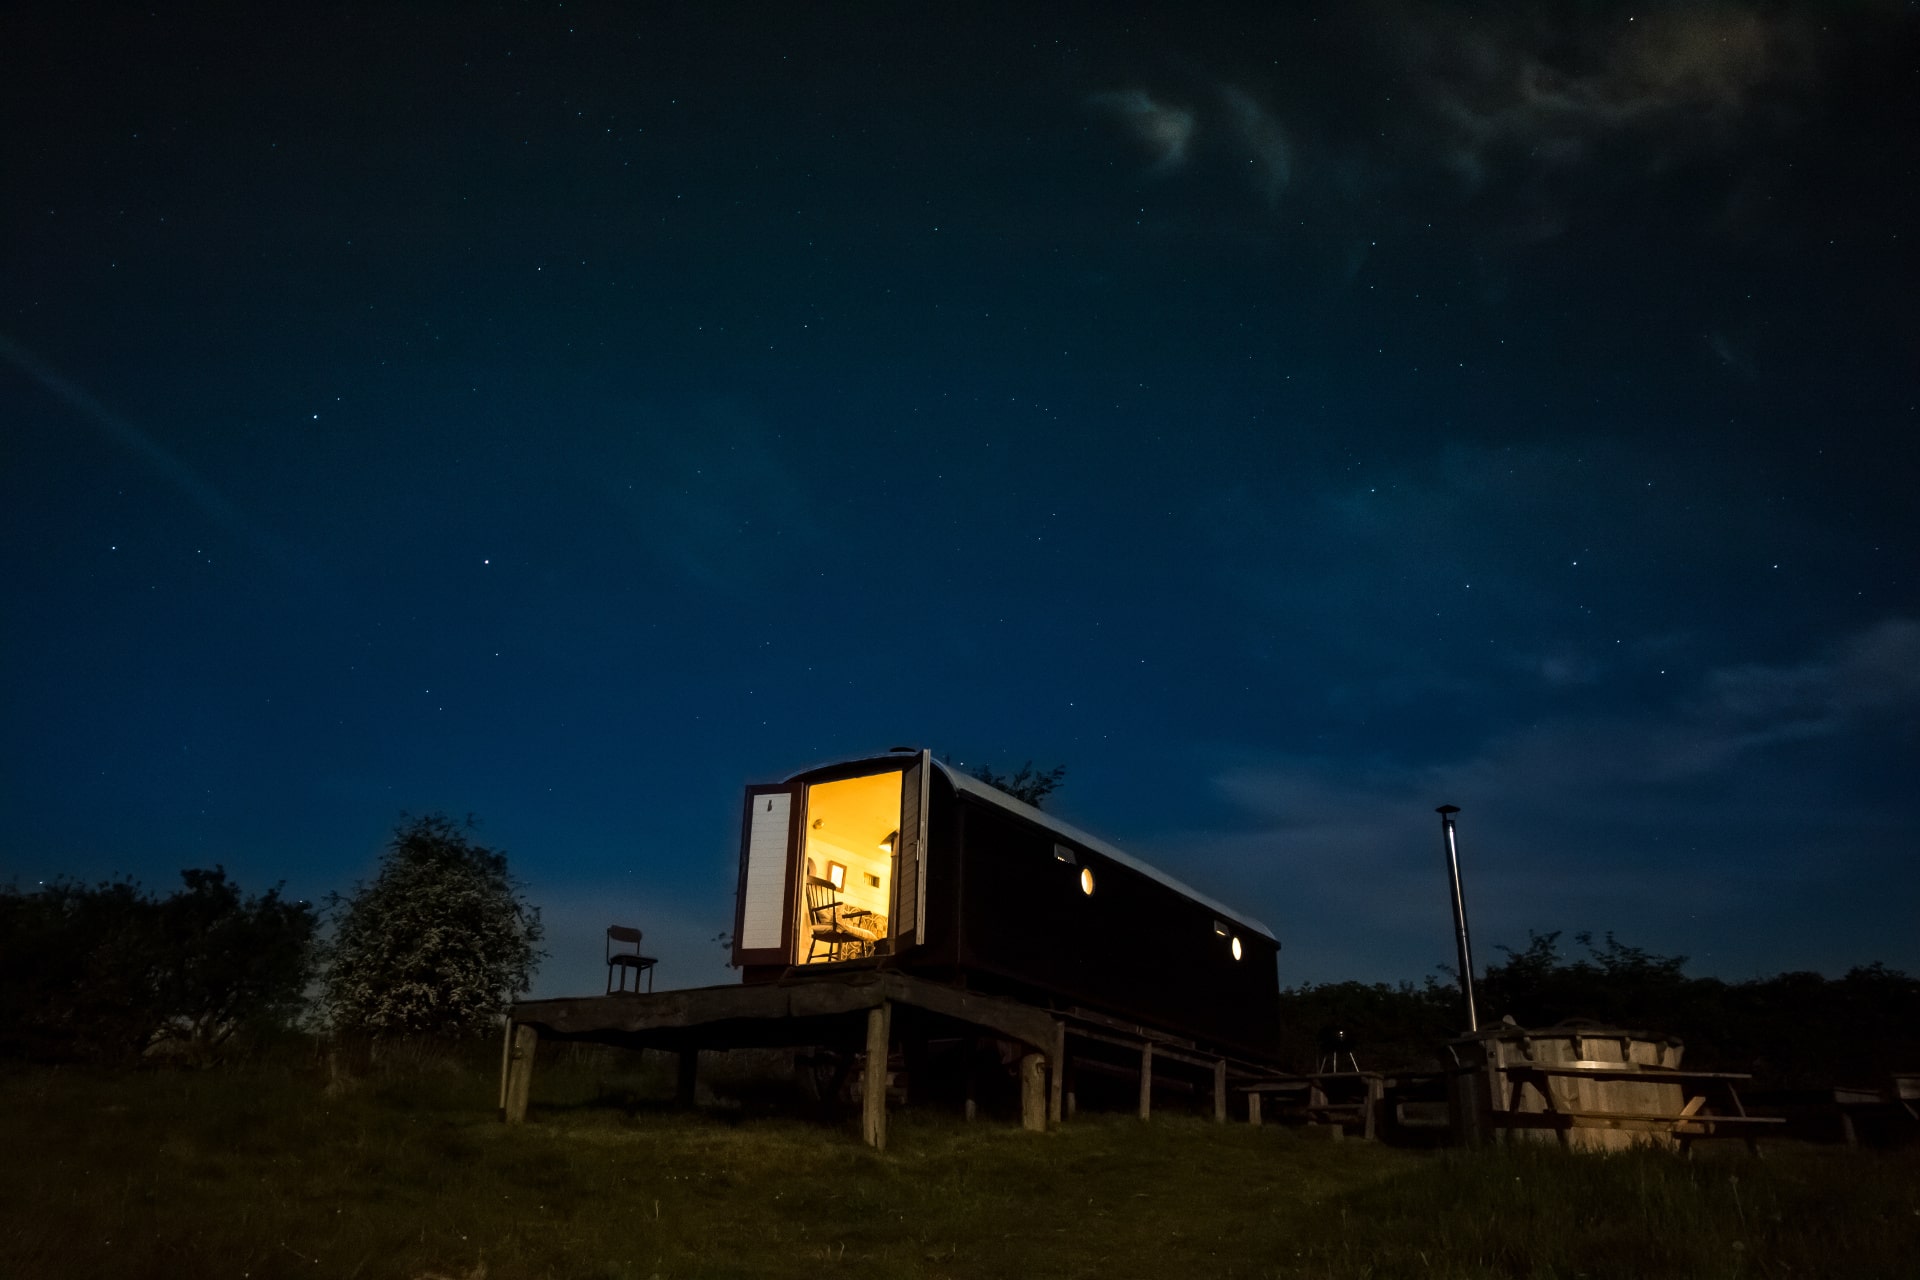 herefordshire-hideaways-stargazers-wagon-with-hot-tub-lit-up-at-night-under-a-starry-night-sky-glamping-herefordshire